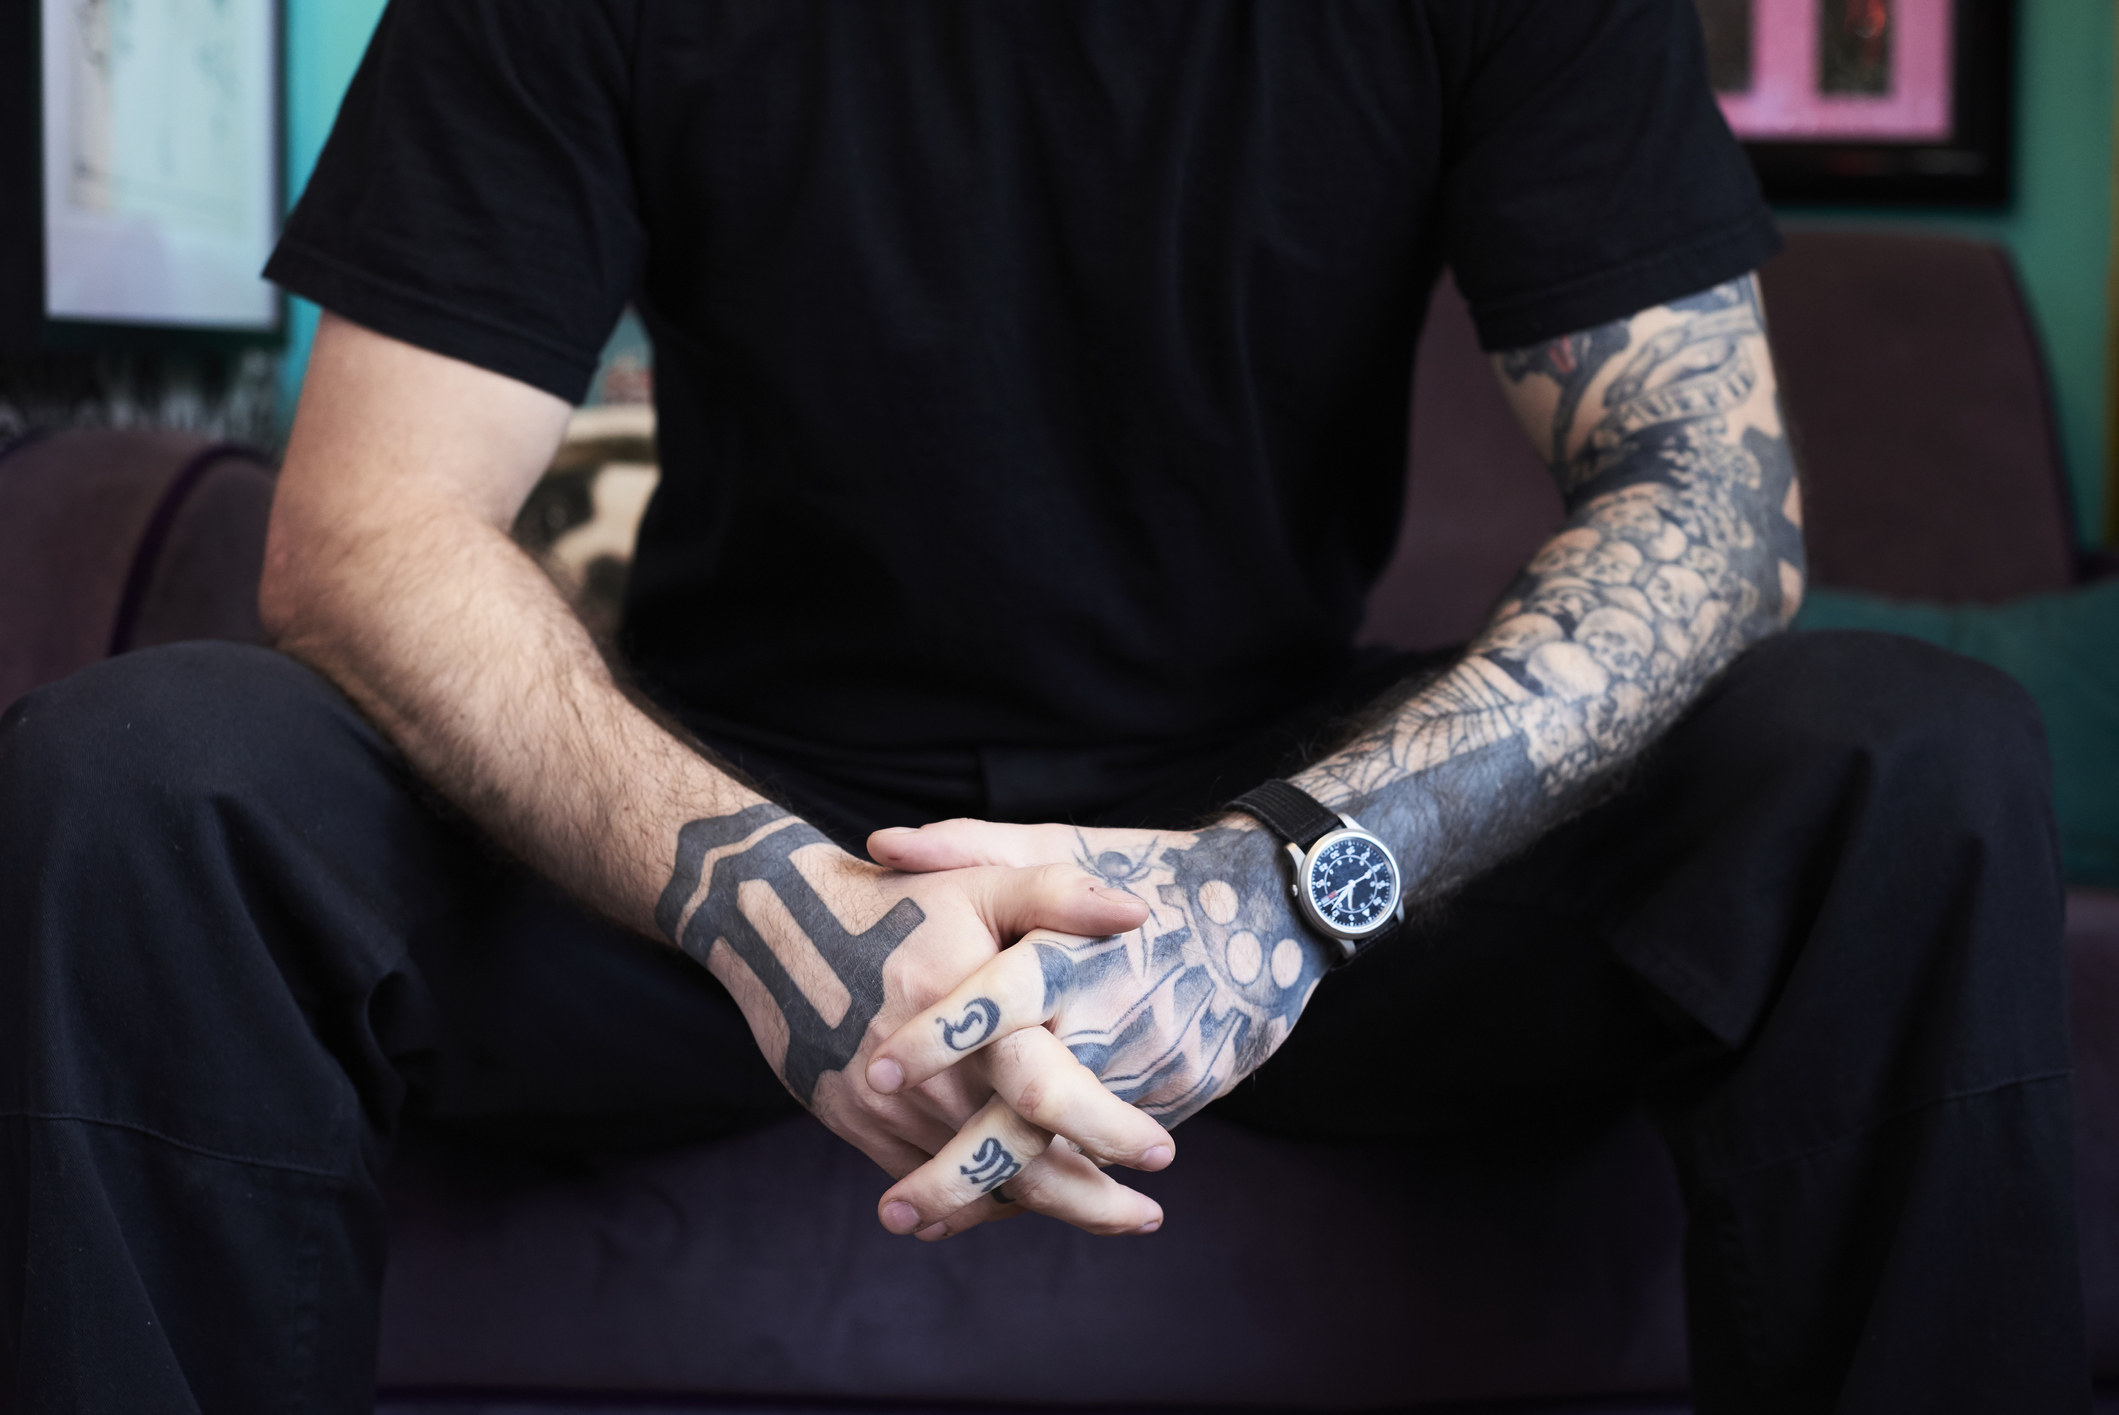 A man with tattoos